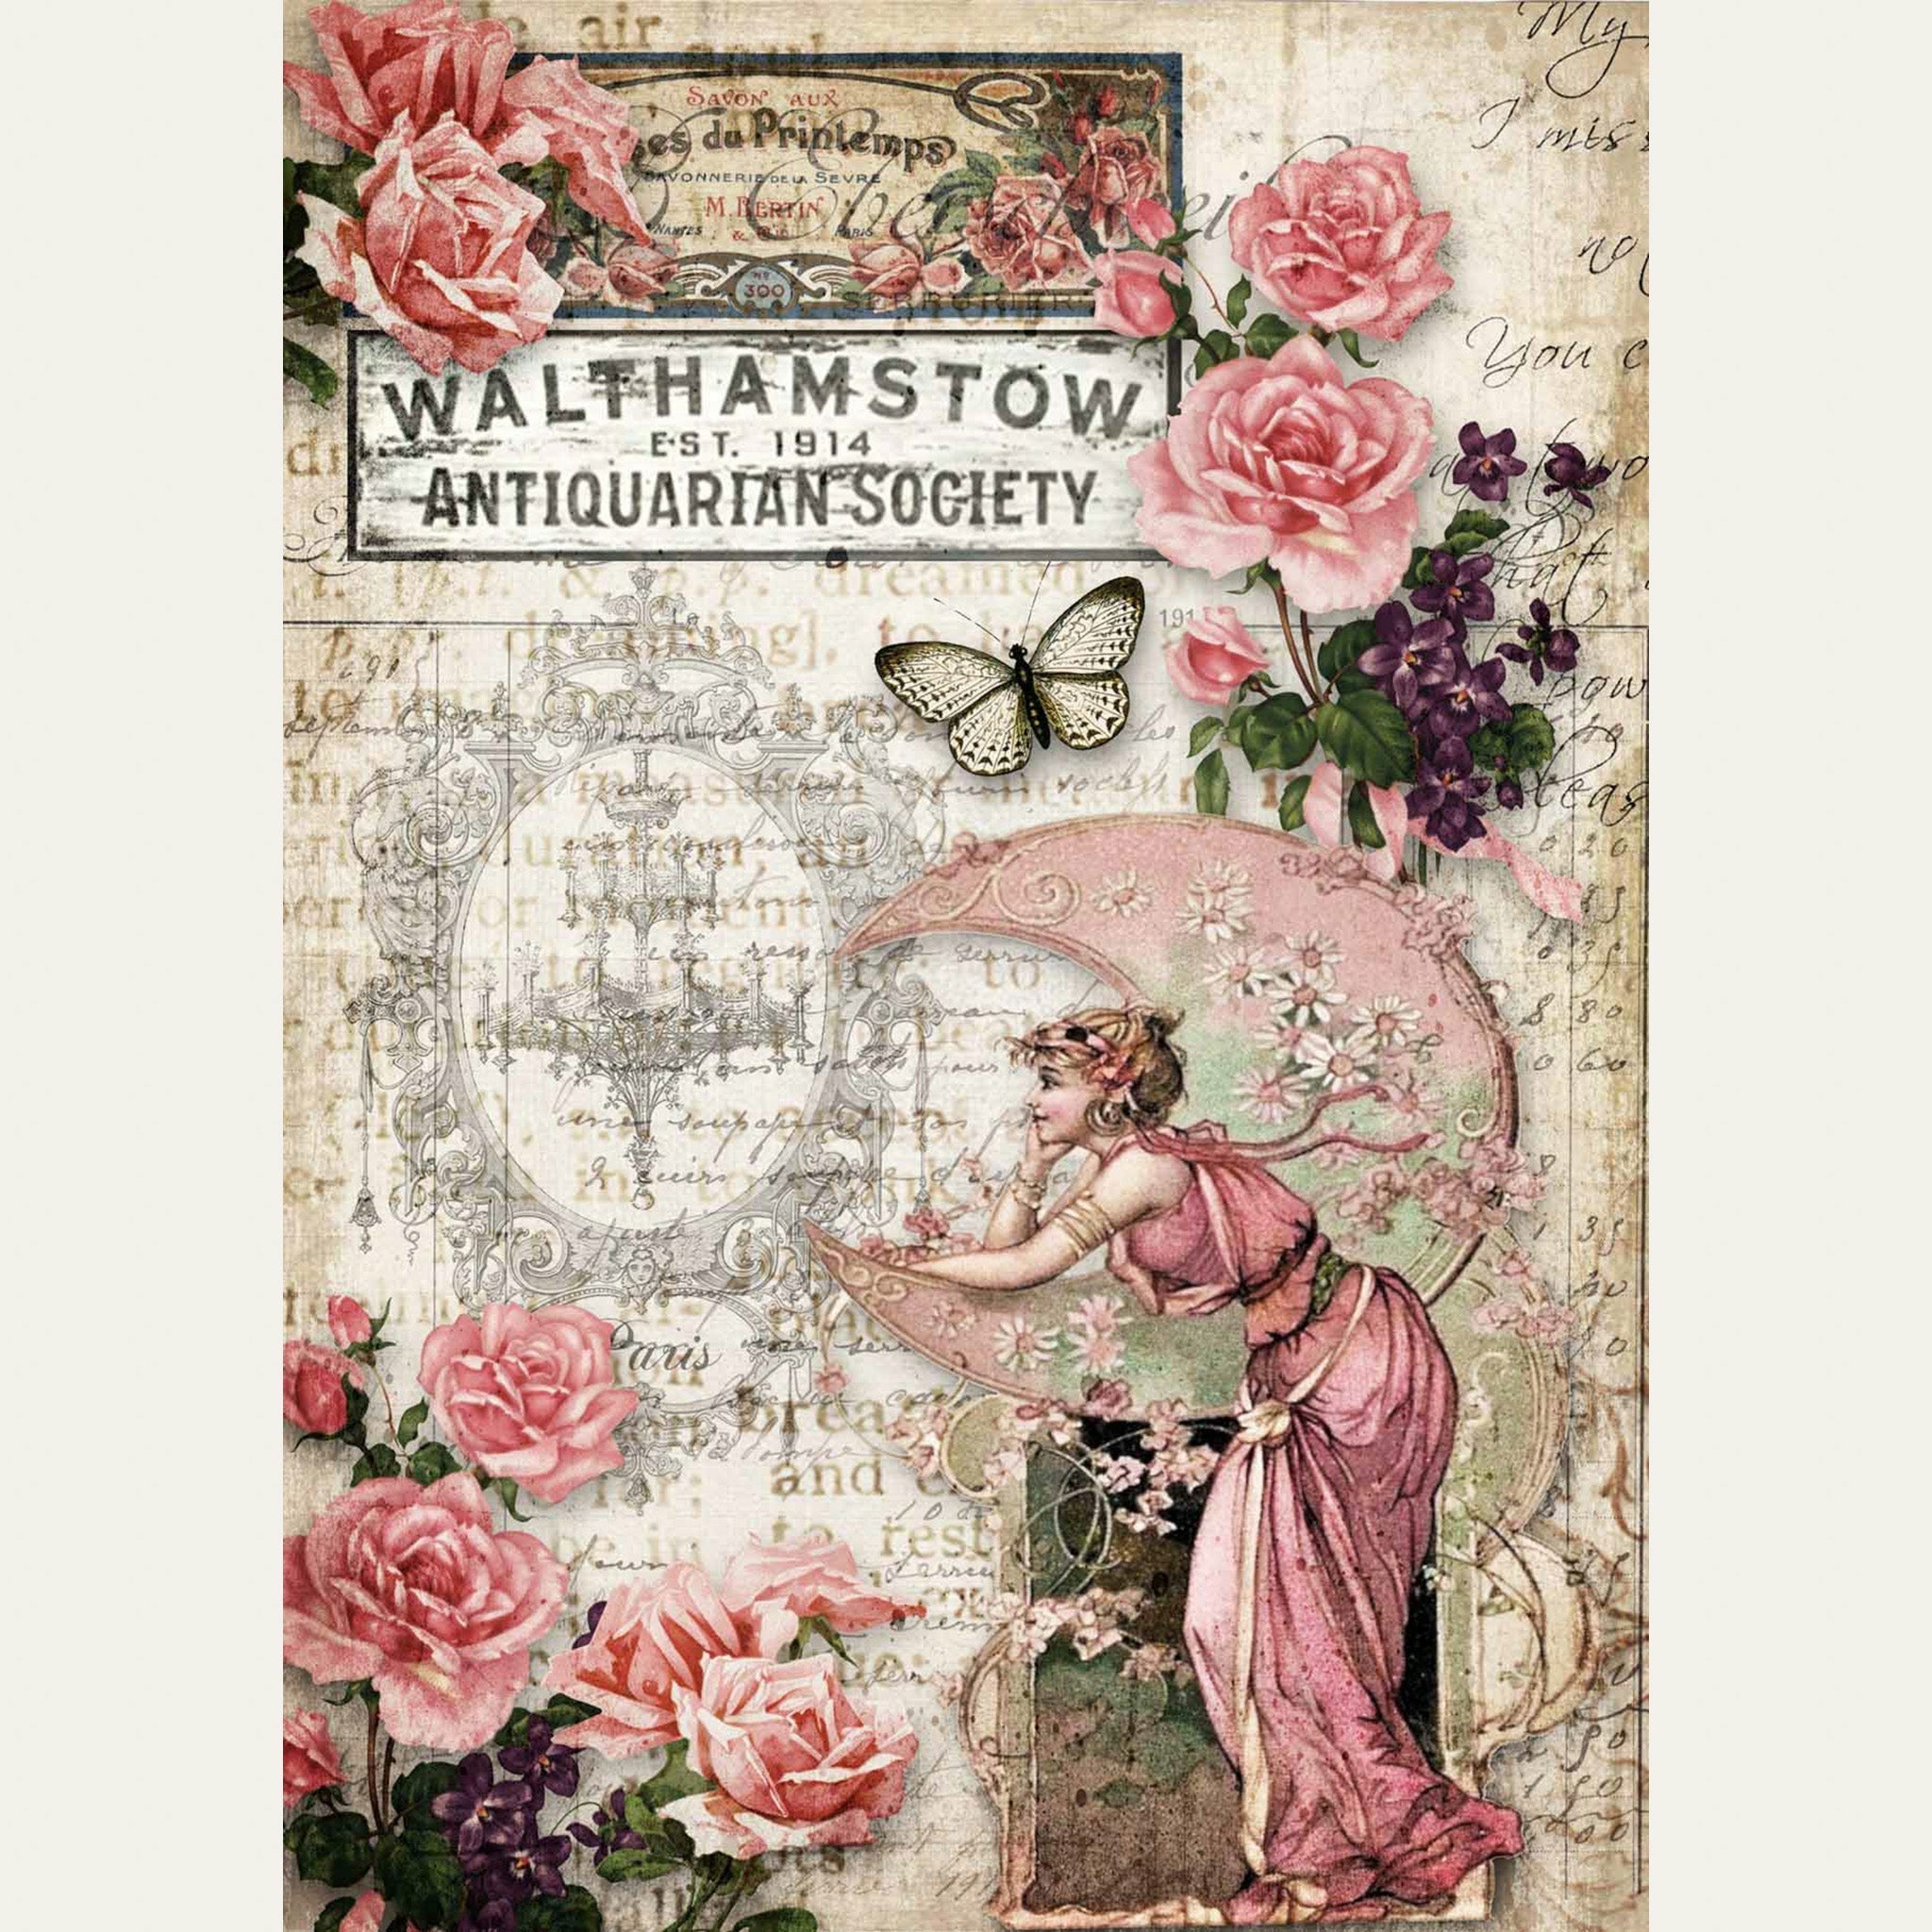 A2 rice paper design that features vintage parchment with writing, large pink roses, a butterfly, vintage signs, and a woman in a pink dress resting on a pale pink crescent moon. White borders on the sides.